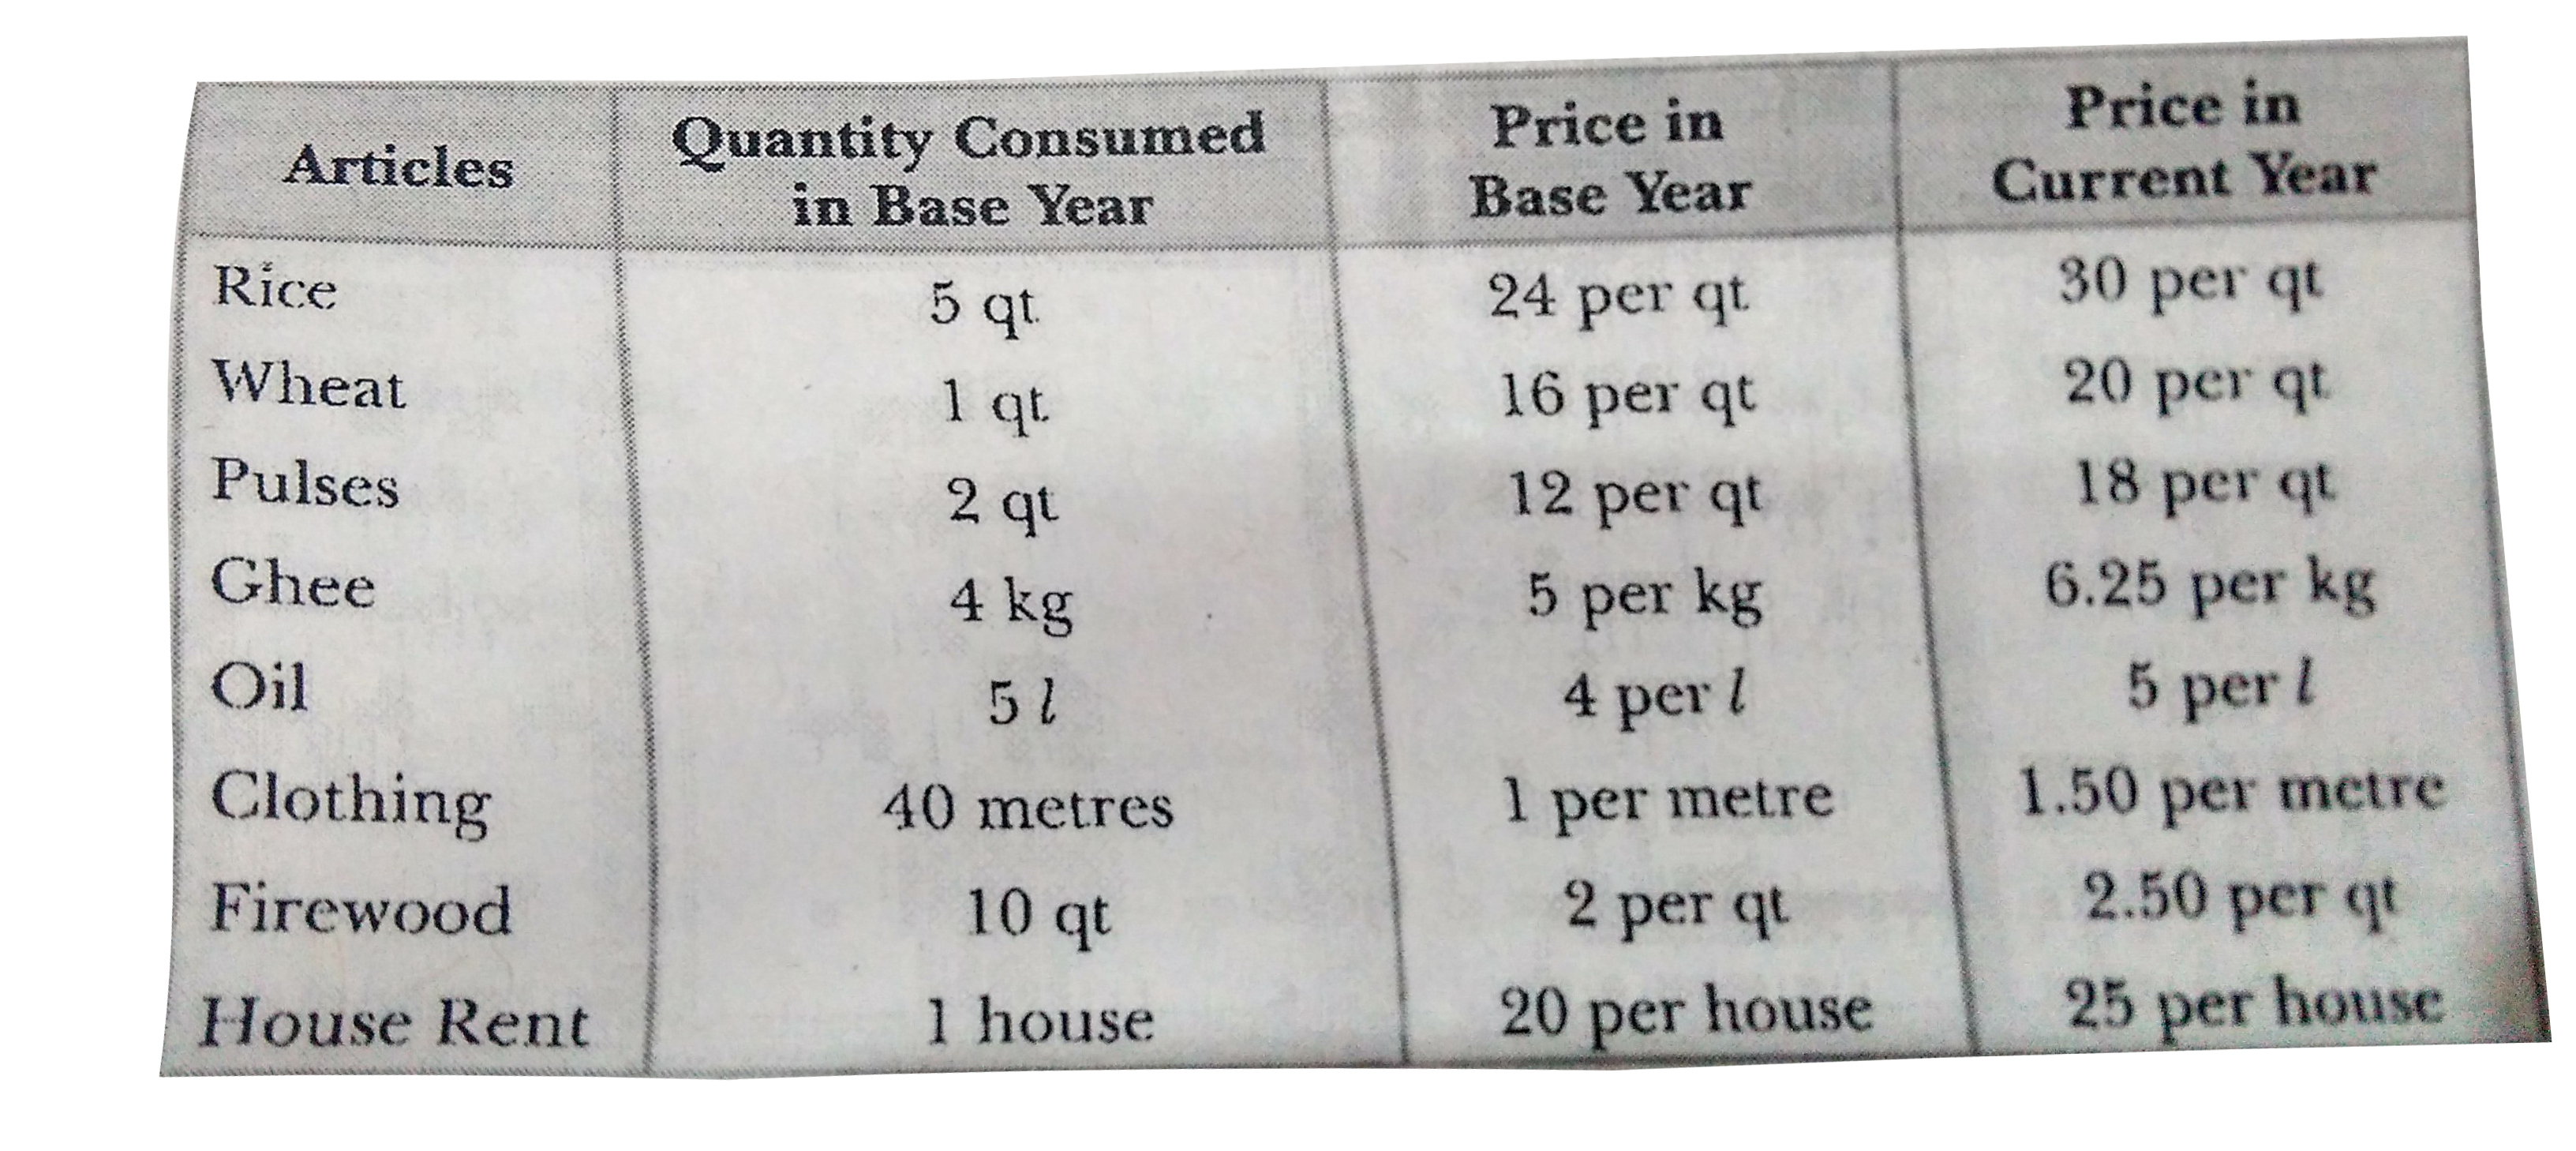 Find the Consumer Price Index or the Cost of Living Index Number for the current year from the following data by (i) Aggregate Expenditure Method, and (ii) Family Budget Method.